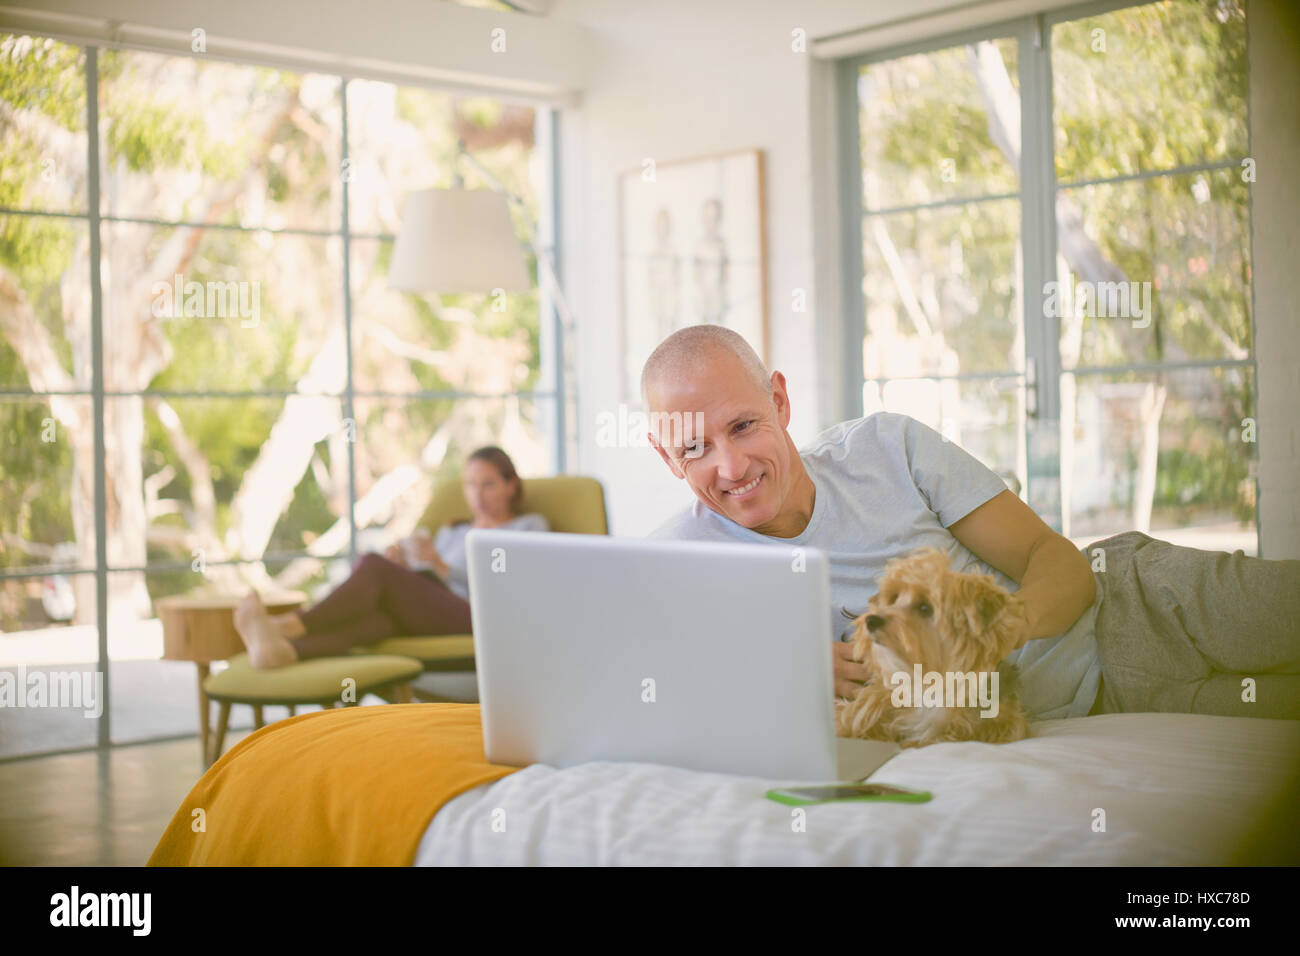 Smiling man with dog on bed Banque D'Images